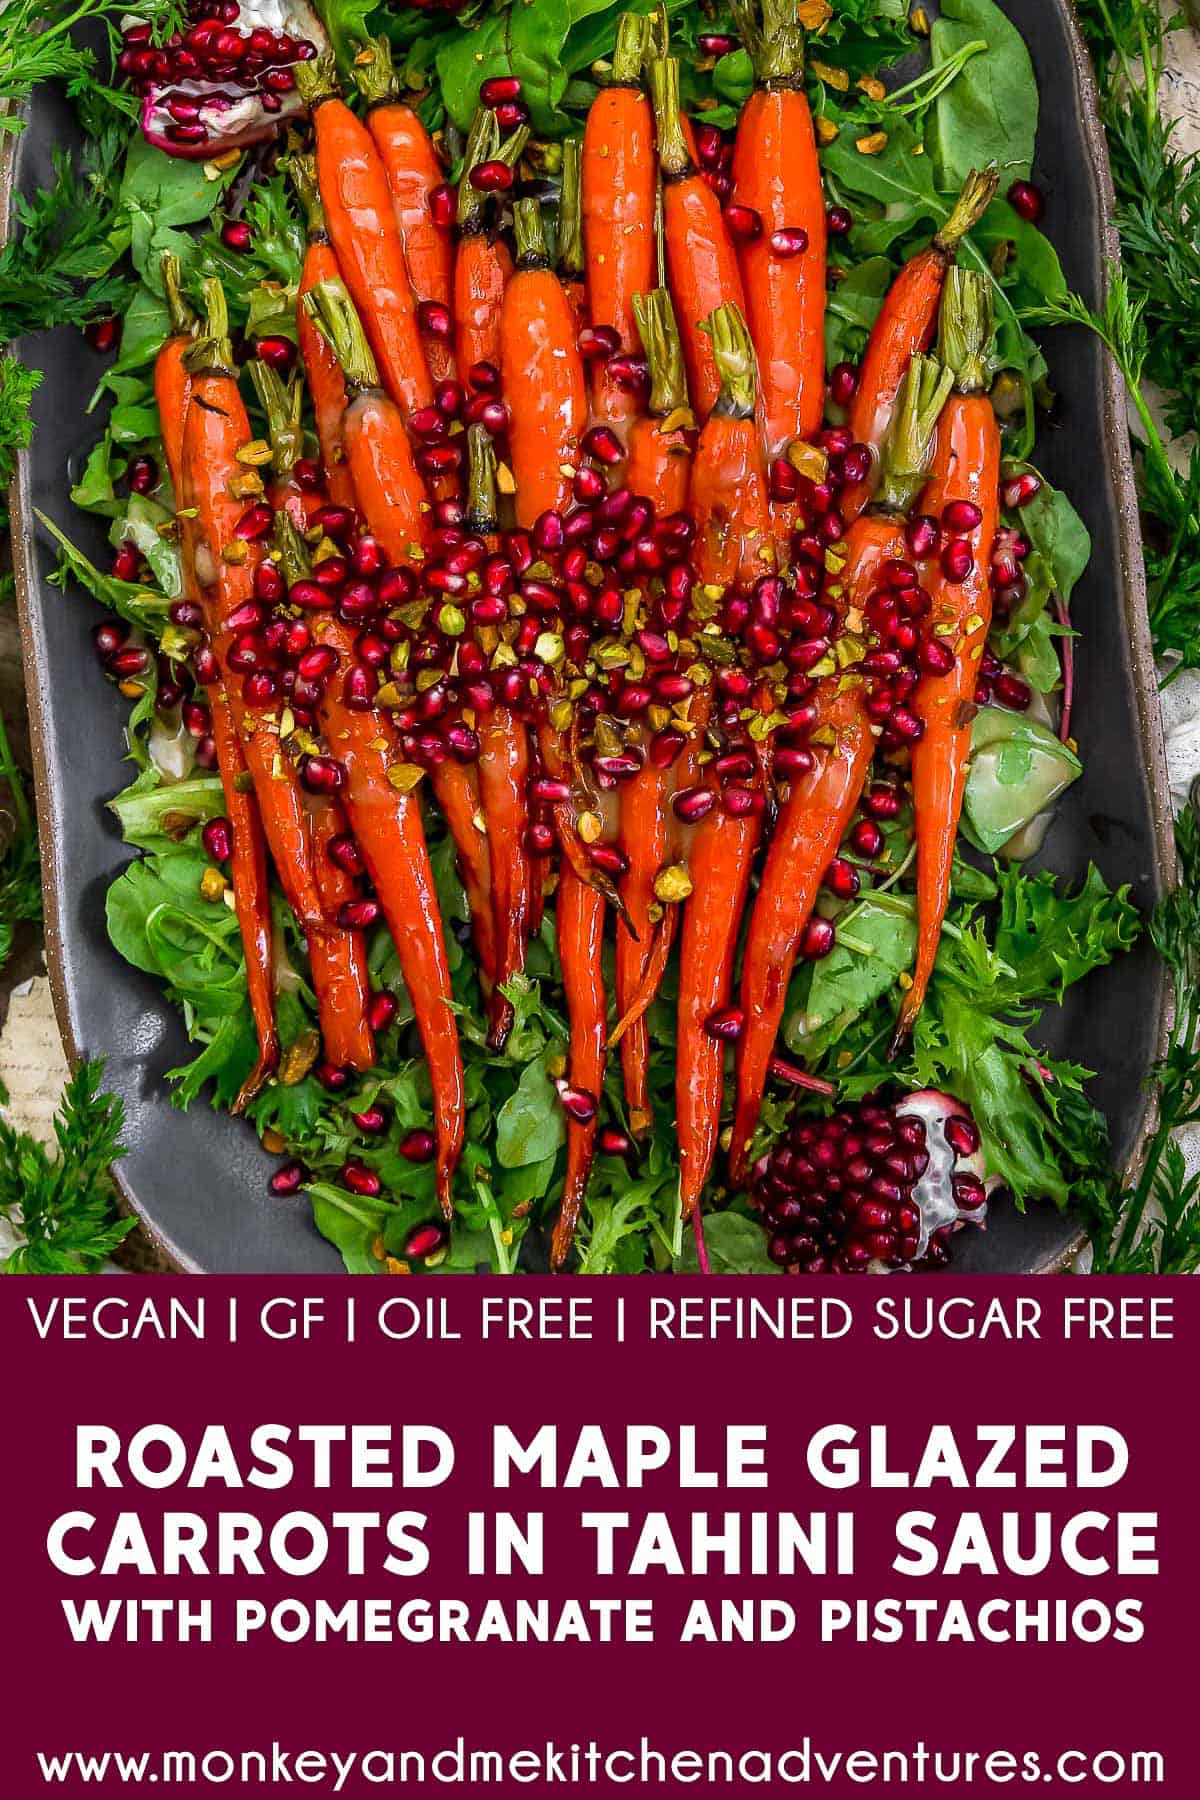 Roasted Maple Glazed Carrots in Tahini Sauce with Pomegranate and Pistachios with text drescirption